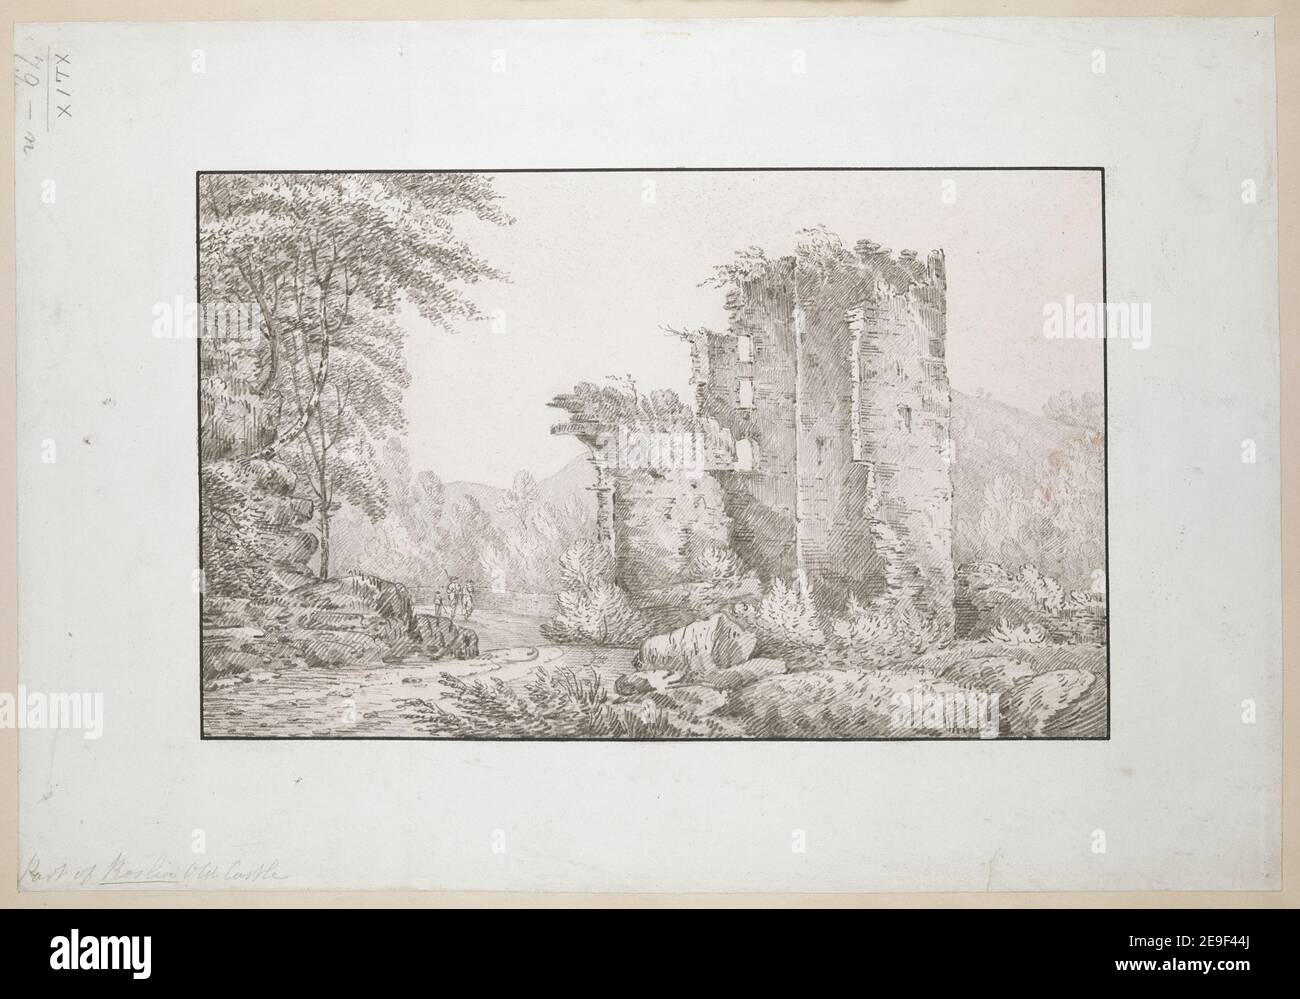 Part of Roslin Old Castle. Author  Wilkinson, Joseph 49.79.n. Date of publication: [about 1800-1820]  Item type: 1 drawing Medium: pencil Dimensions: sheet 29 x 42 cm  Former owner: George III, King of Great Britain, 1738-1820 Stock Photo